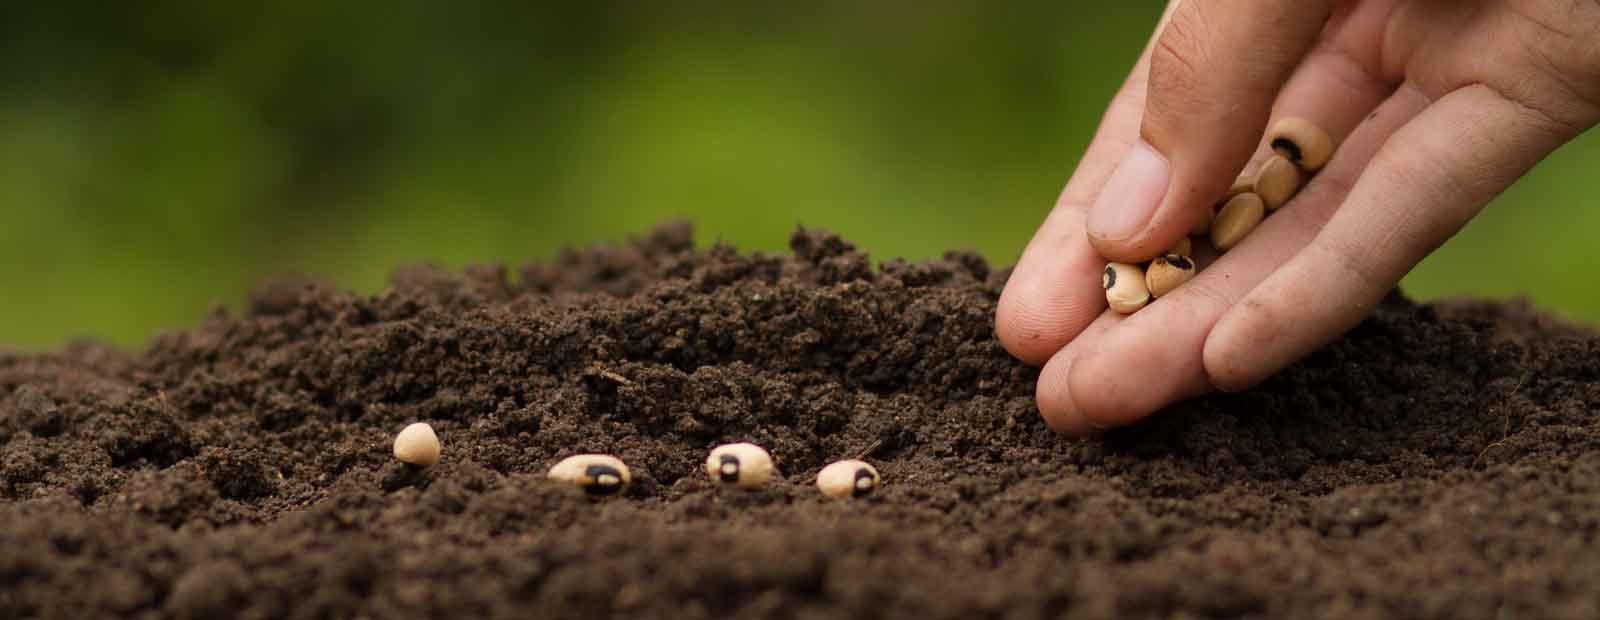 A hand sowing seeds into soil.